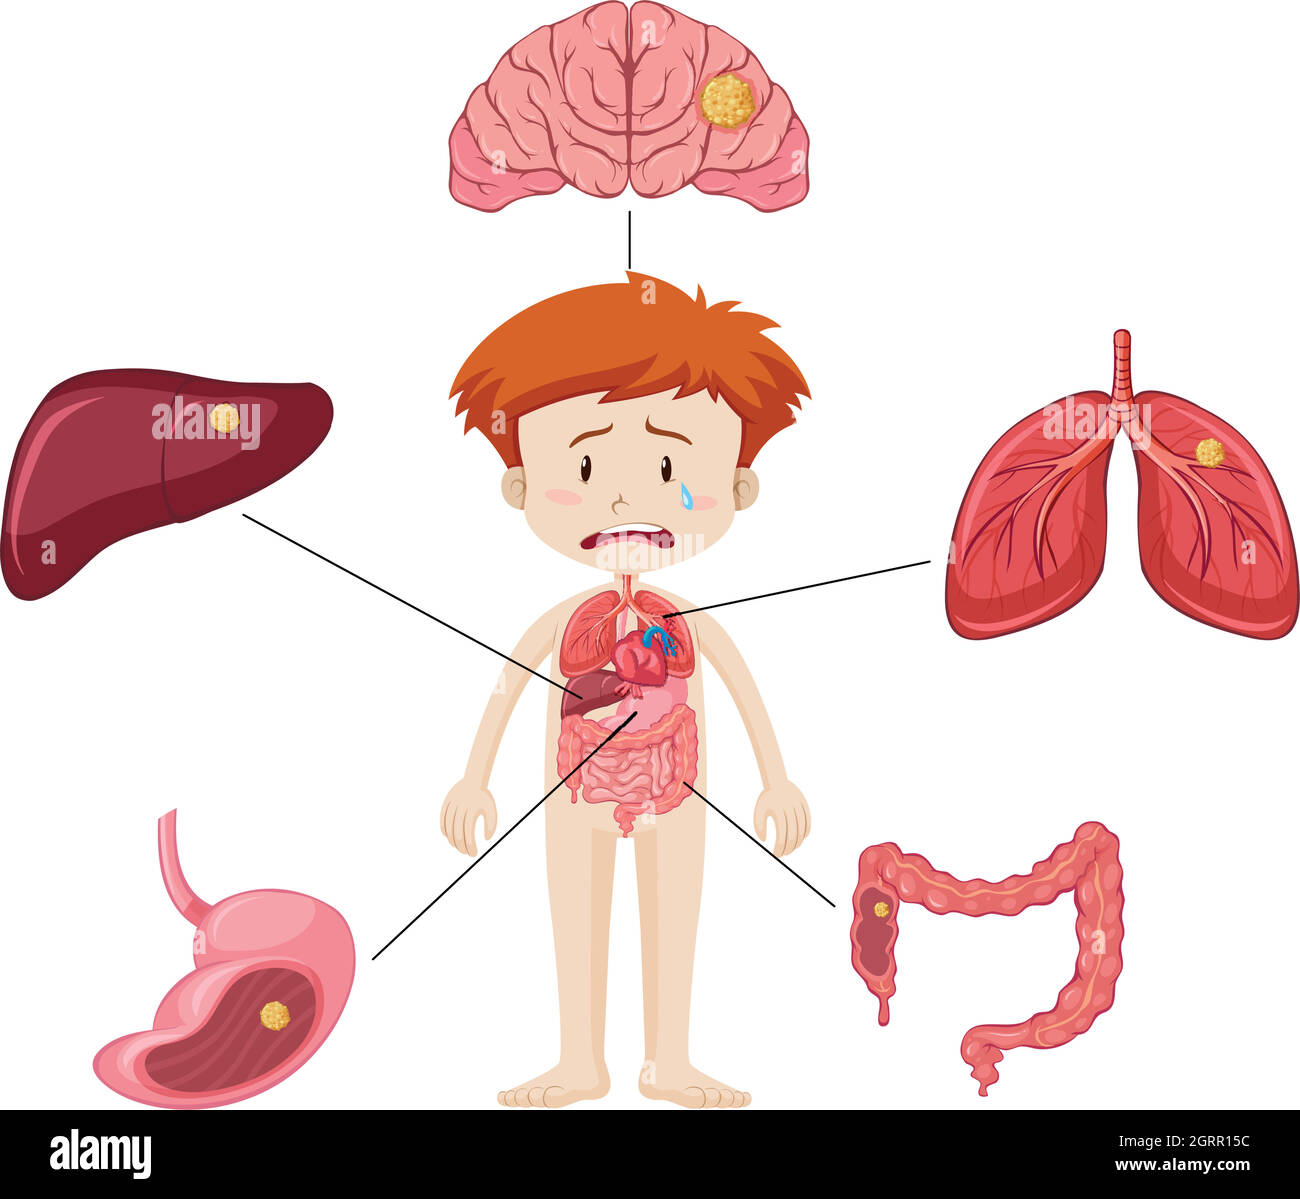 Boy and diagram showing different parts of organs with disease Stock Vector